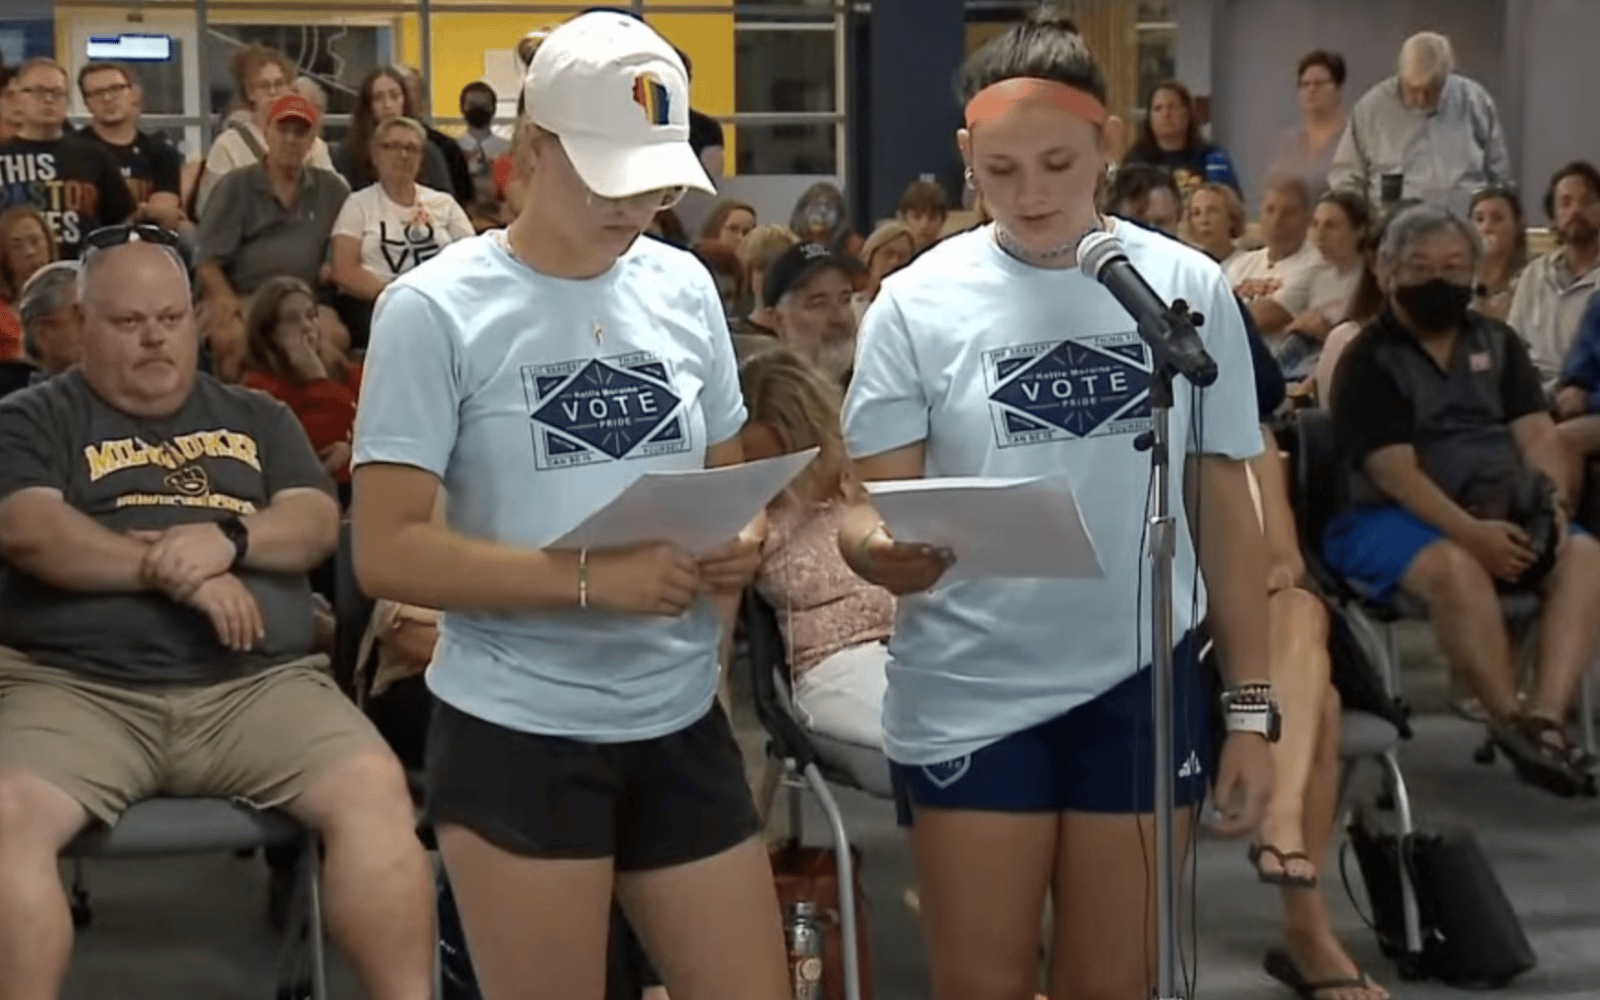 Two women stand in front of a packed crowd discussing notes they have written on paper.